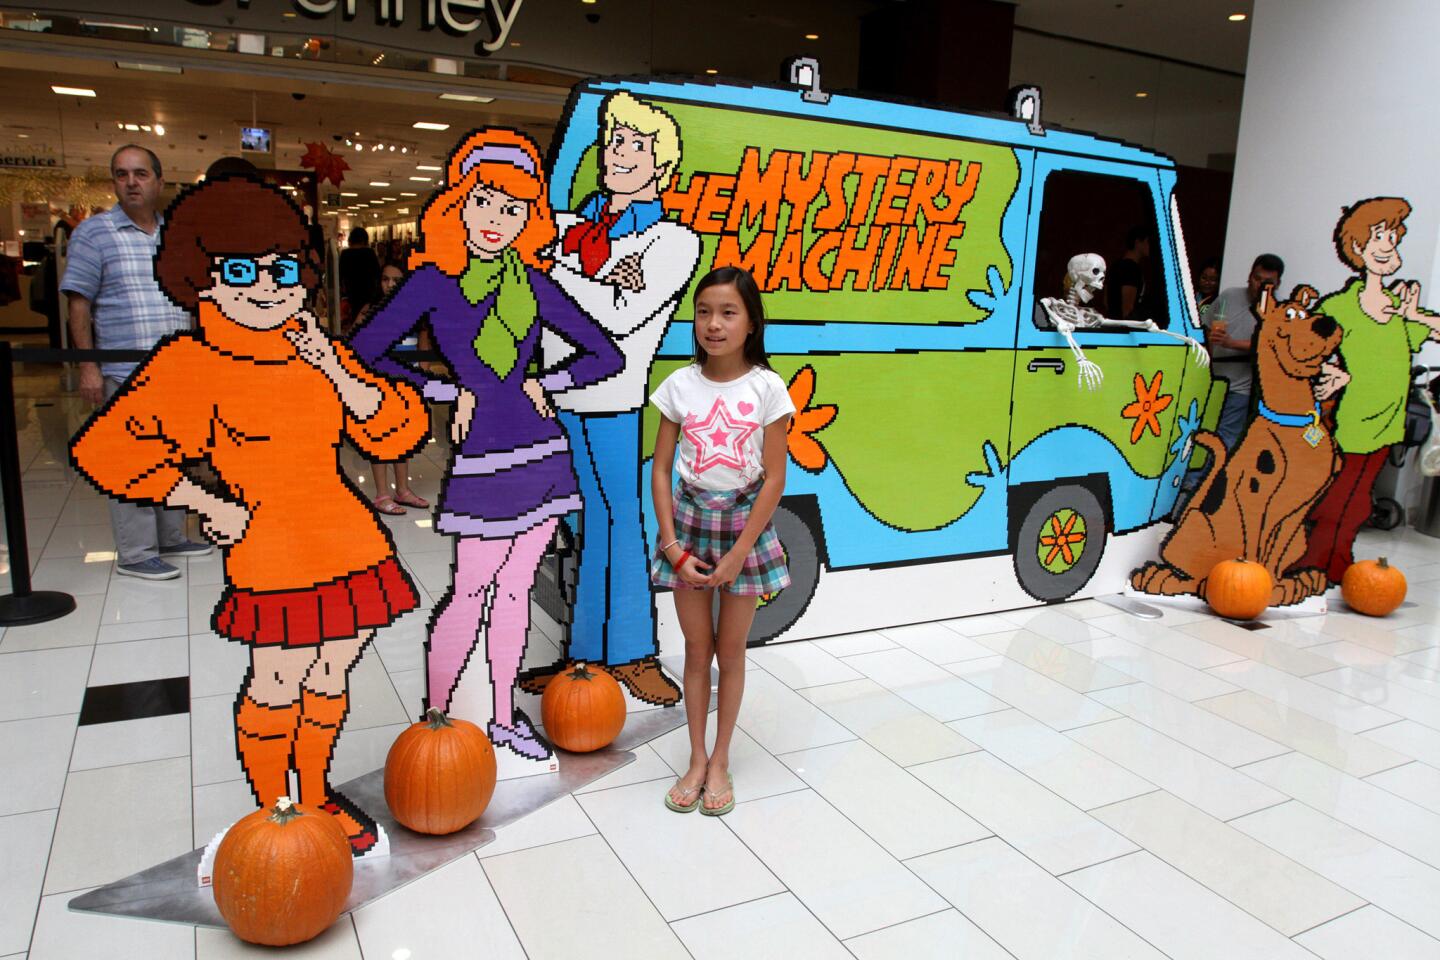 Mercy Prather, 11 of Montrose, poses with the Scooby-Doo gang, Velma, Daphne, Fred, Scooby and Shaggy, which are made from legos, at the Glendale Galleria in Glendale on Saturday, October 31, 2015. The characters and the Mystery Machine were created with 70, 875 lego pieces, took 86 hours to design and 525 hours to build and glue together. This was the last stop of the 8-city LEGO Scooby-Doo Mystery Tour.